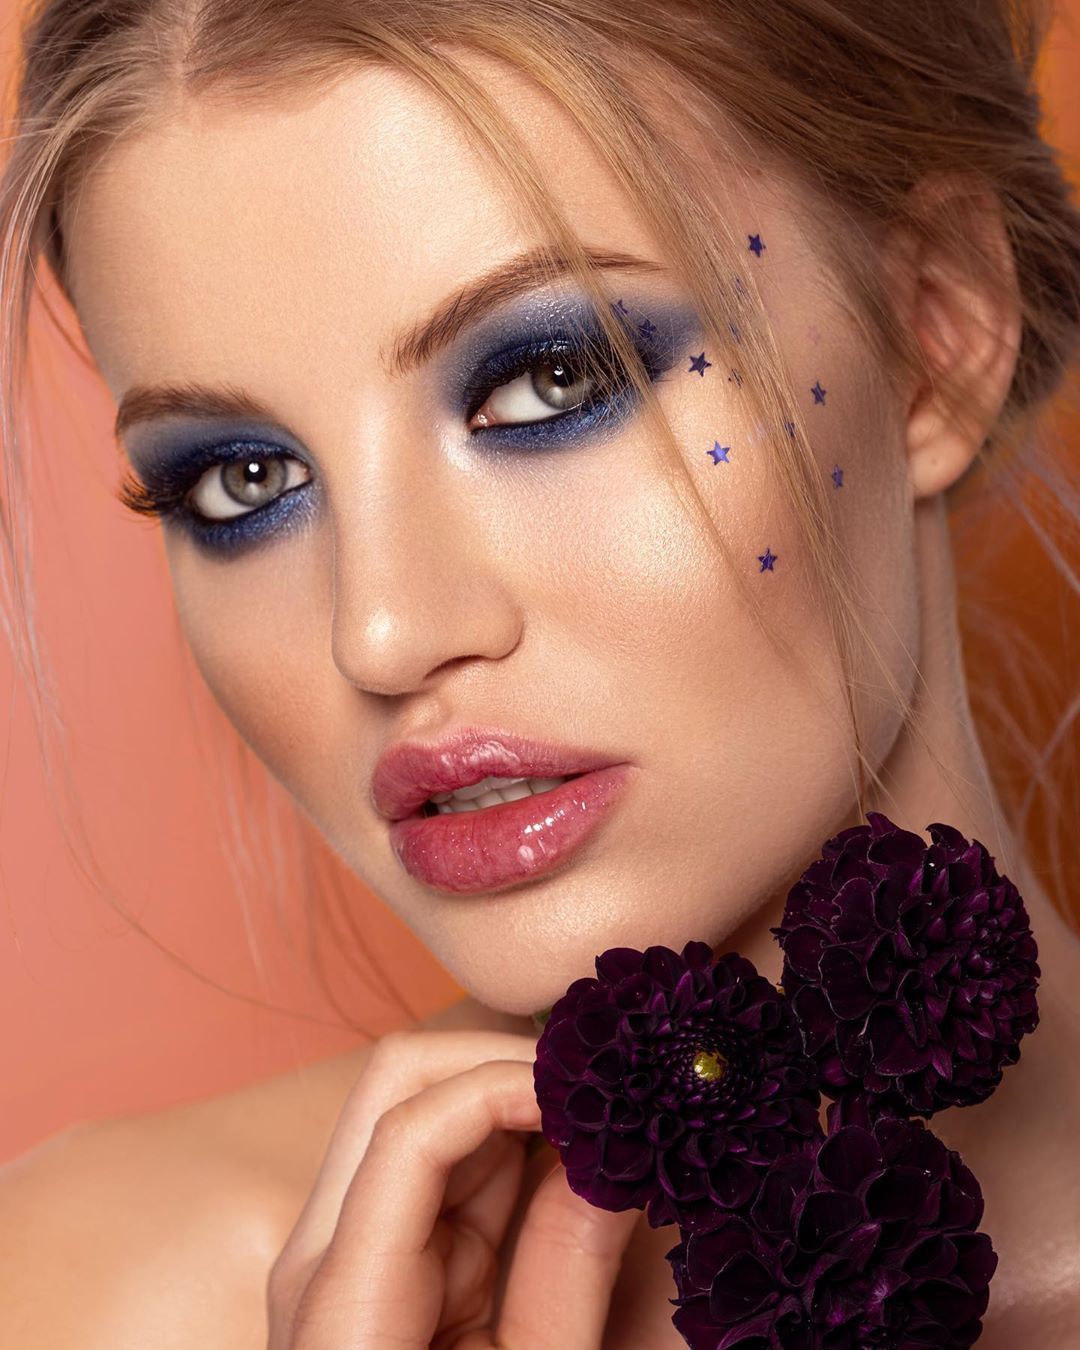 Beautiful White Lady With Blue Eyeshadows Flowers And Stars